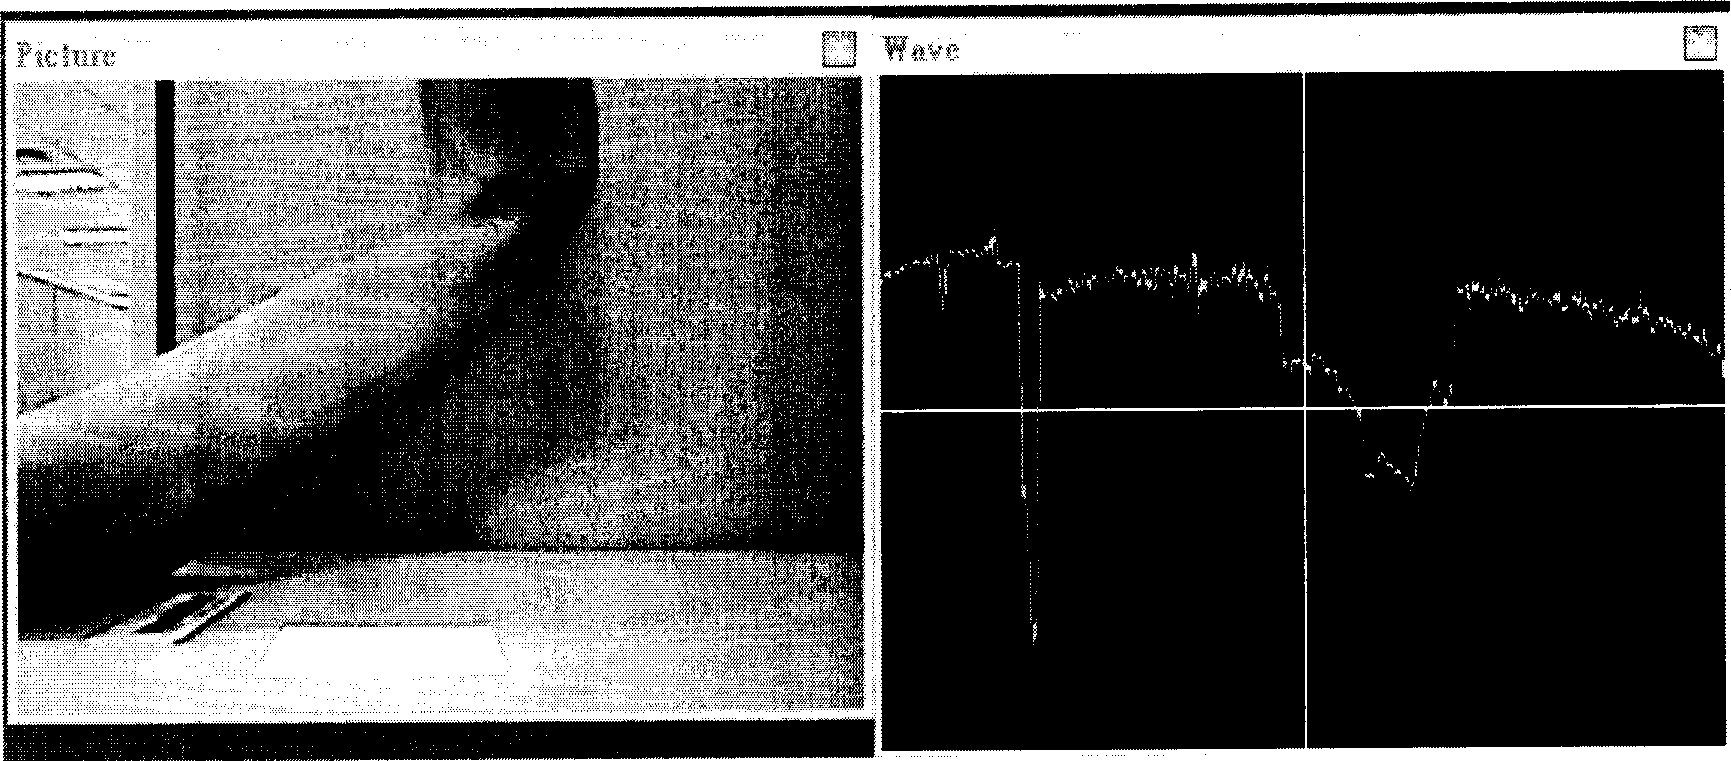 Method for carrying out real-time monitoring using mobile phone with camera function